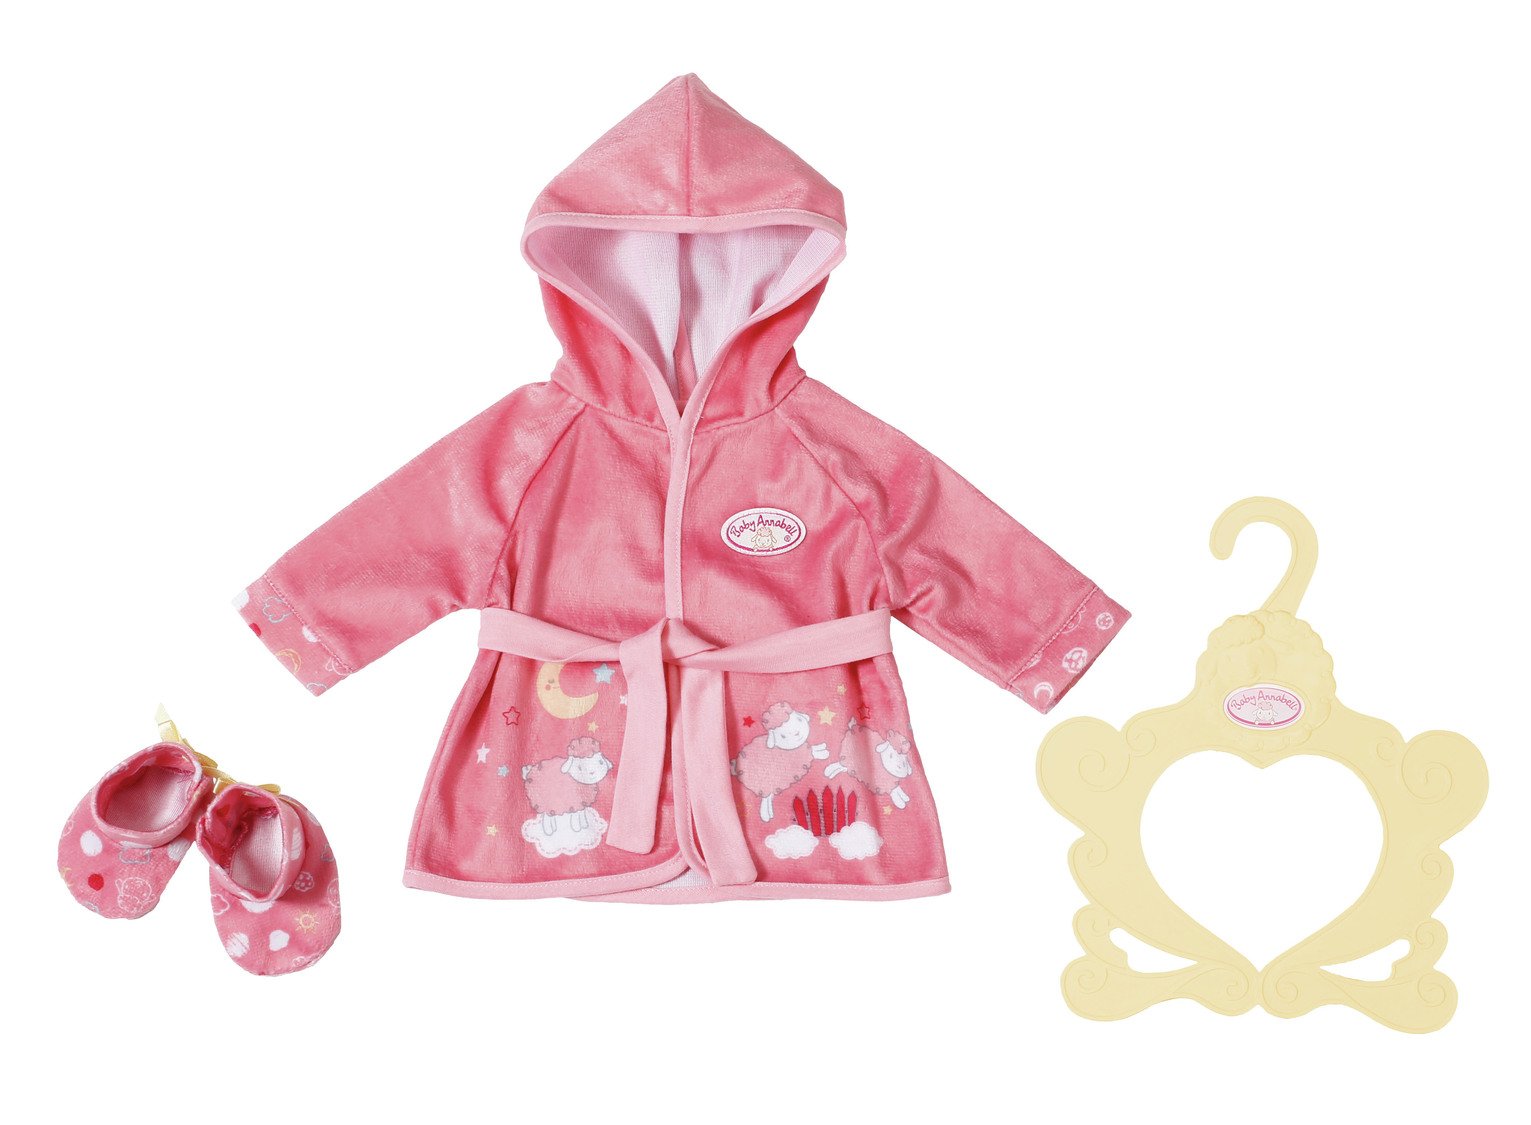 Baby Annabell Sweet Dreams Night Robe 43cm Review